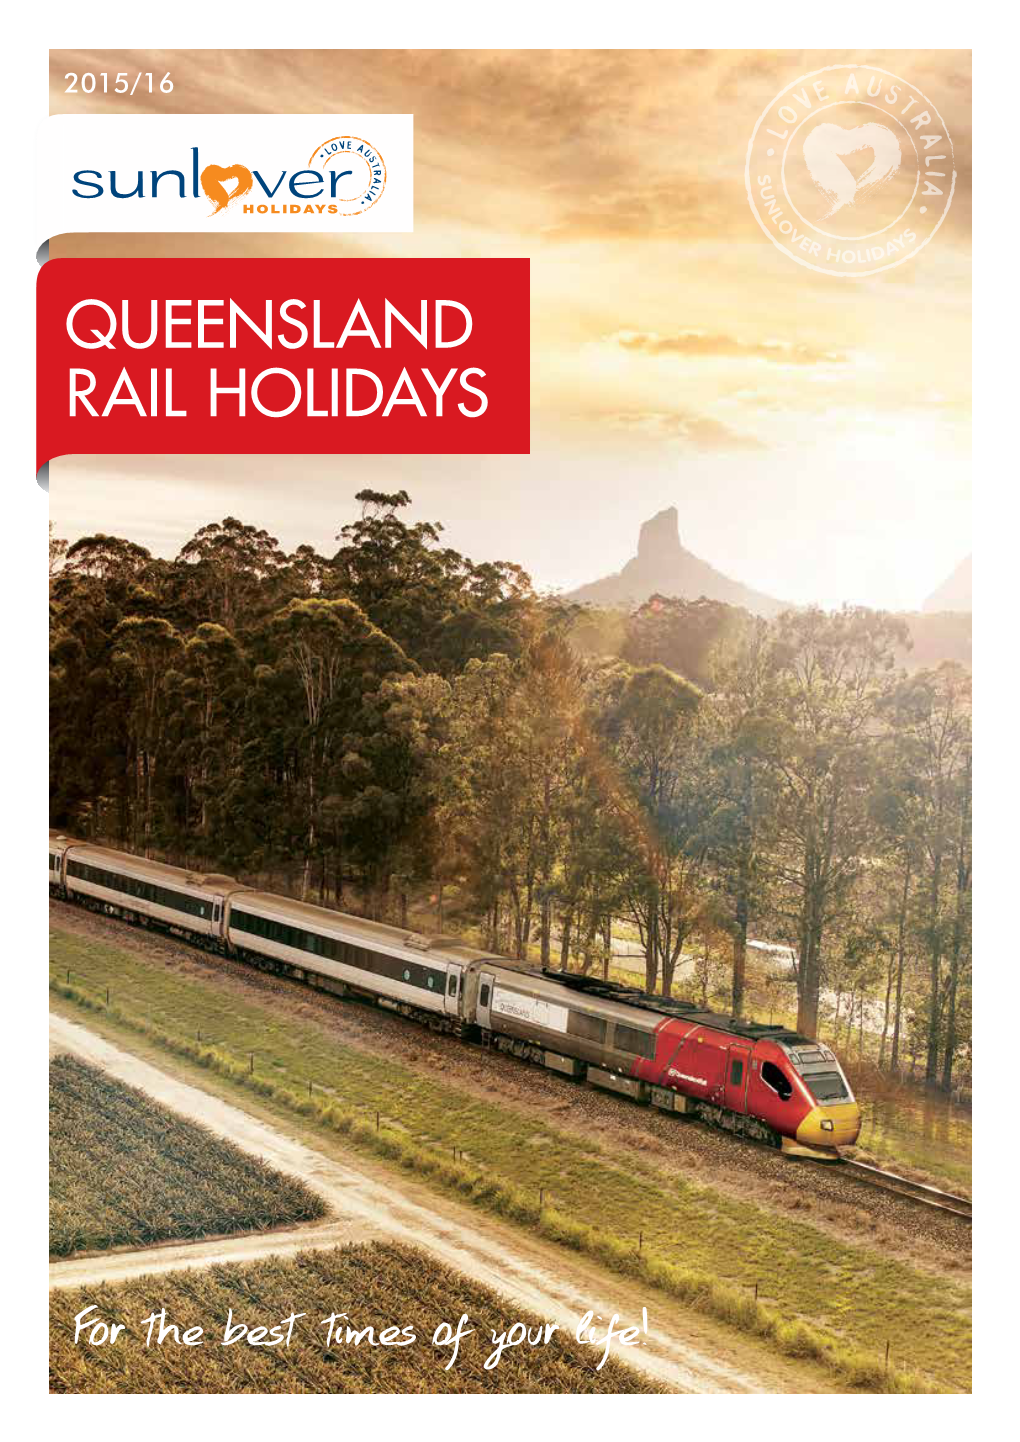 QUEENSLAND RAIL HOLIDAYS for the Best Times of Your Life!